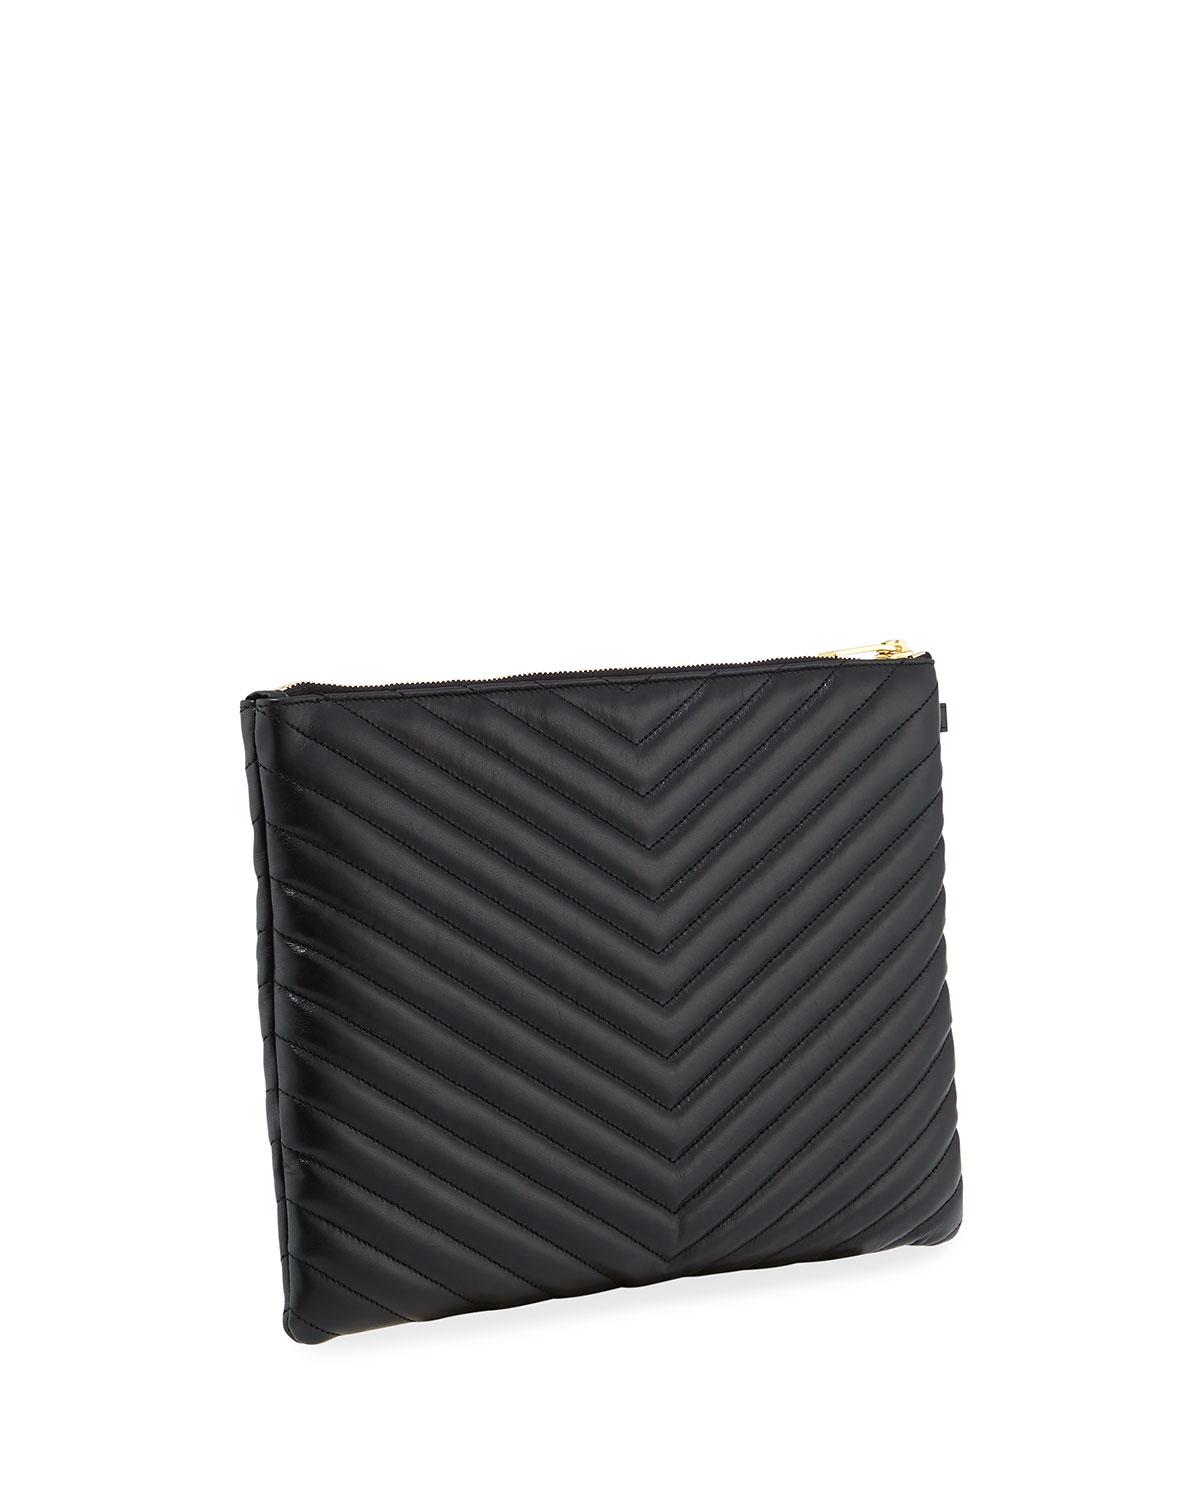 Saint Laurent Leather Monogram Ysl Quilted Wristlet Pouch Bag in Black - Lyst